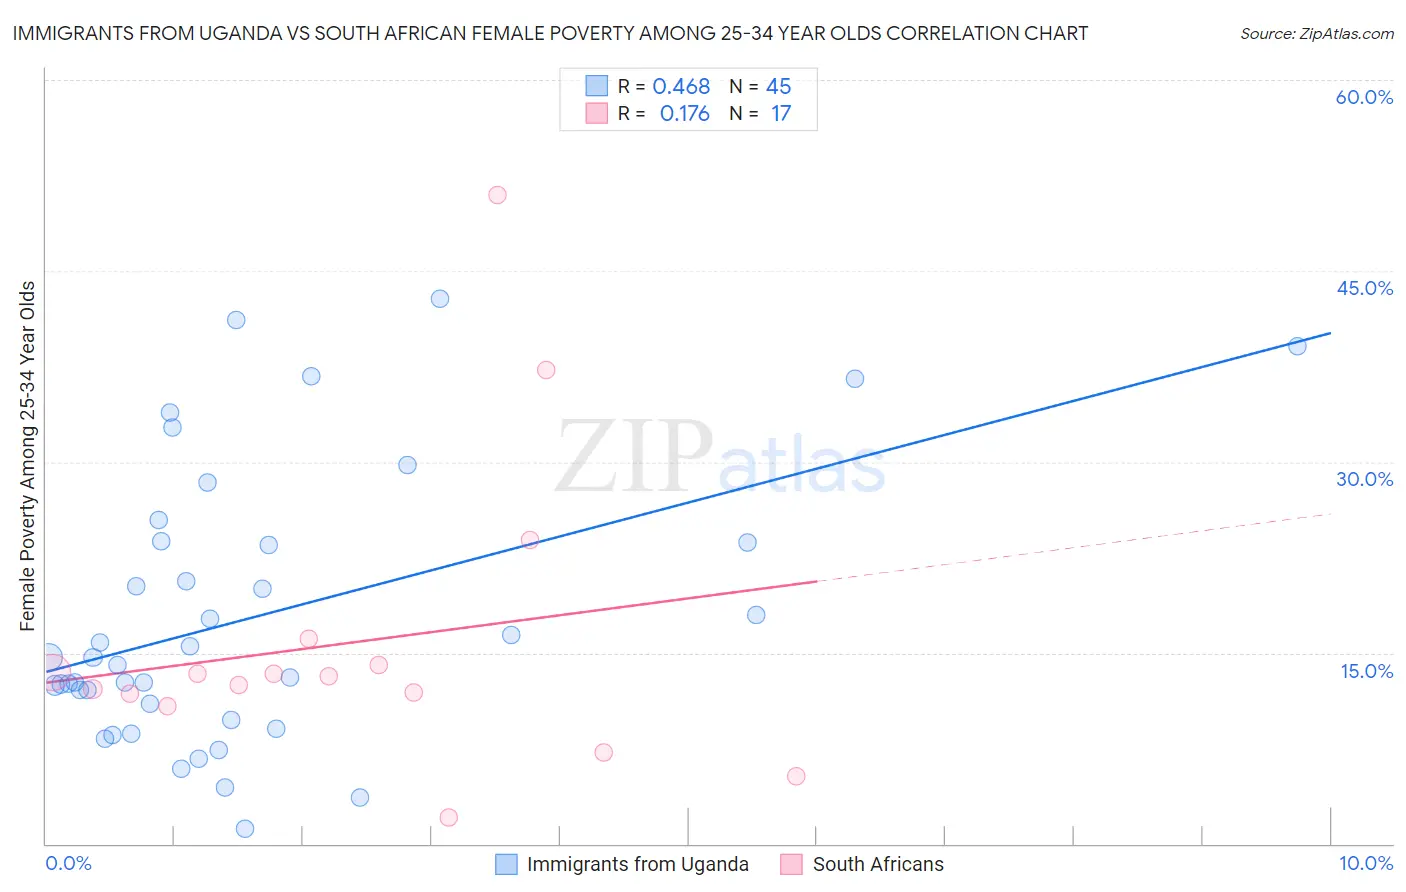 Immigrants from Uganda vs South African Female Poverty Among 25-34 Year Olds